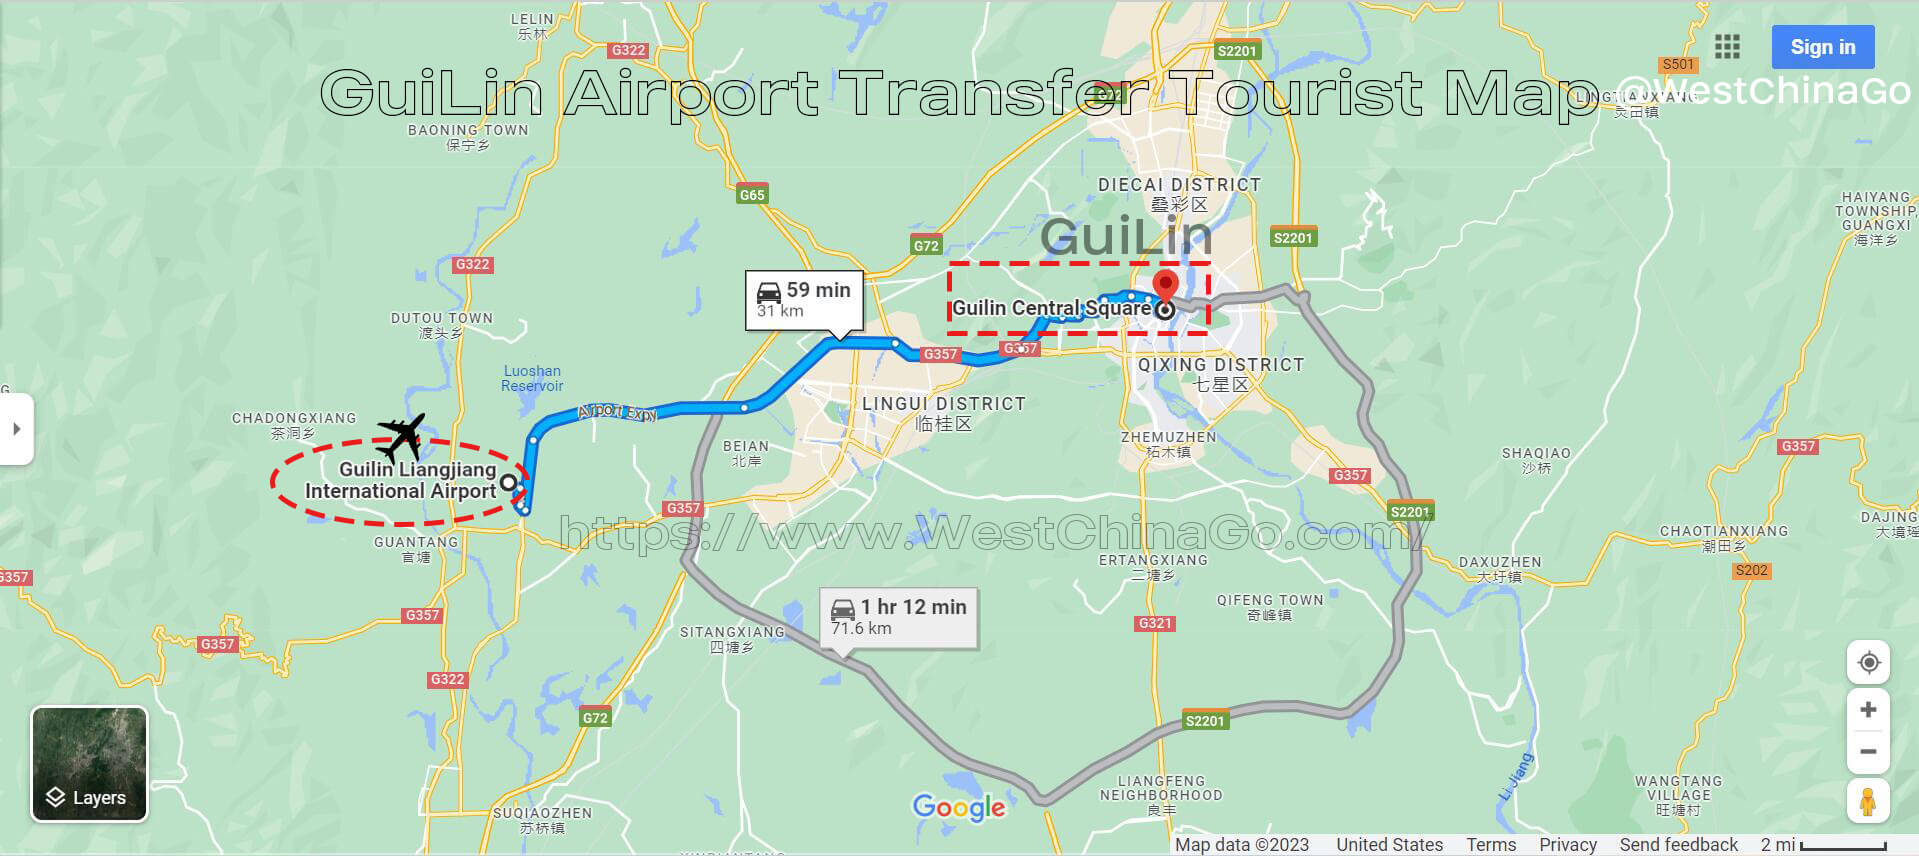 Guilin Airport Transfer Tourist Map